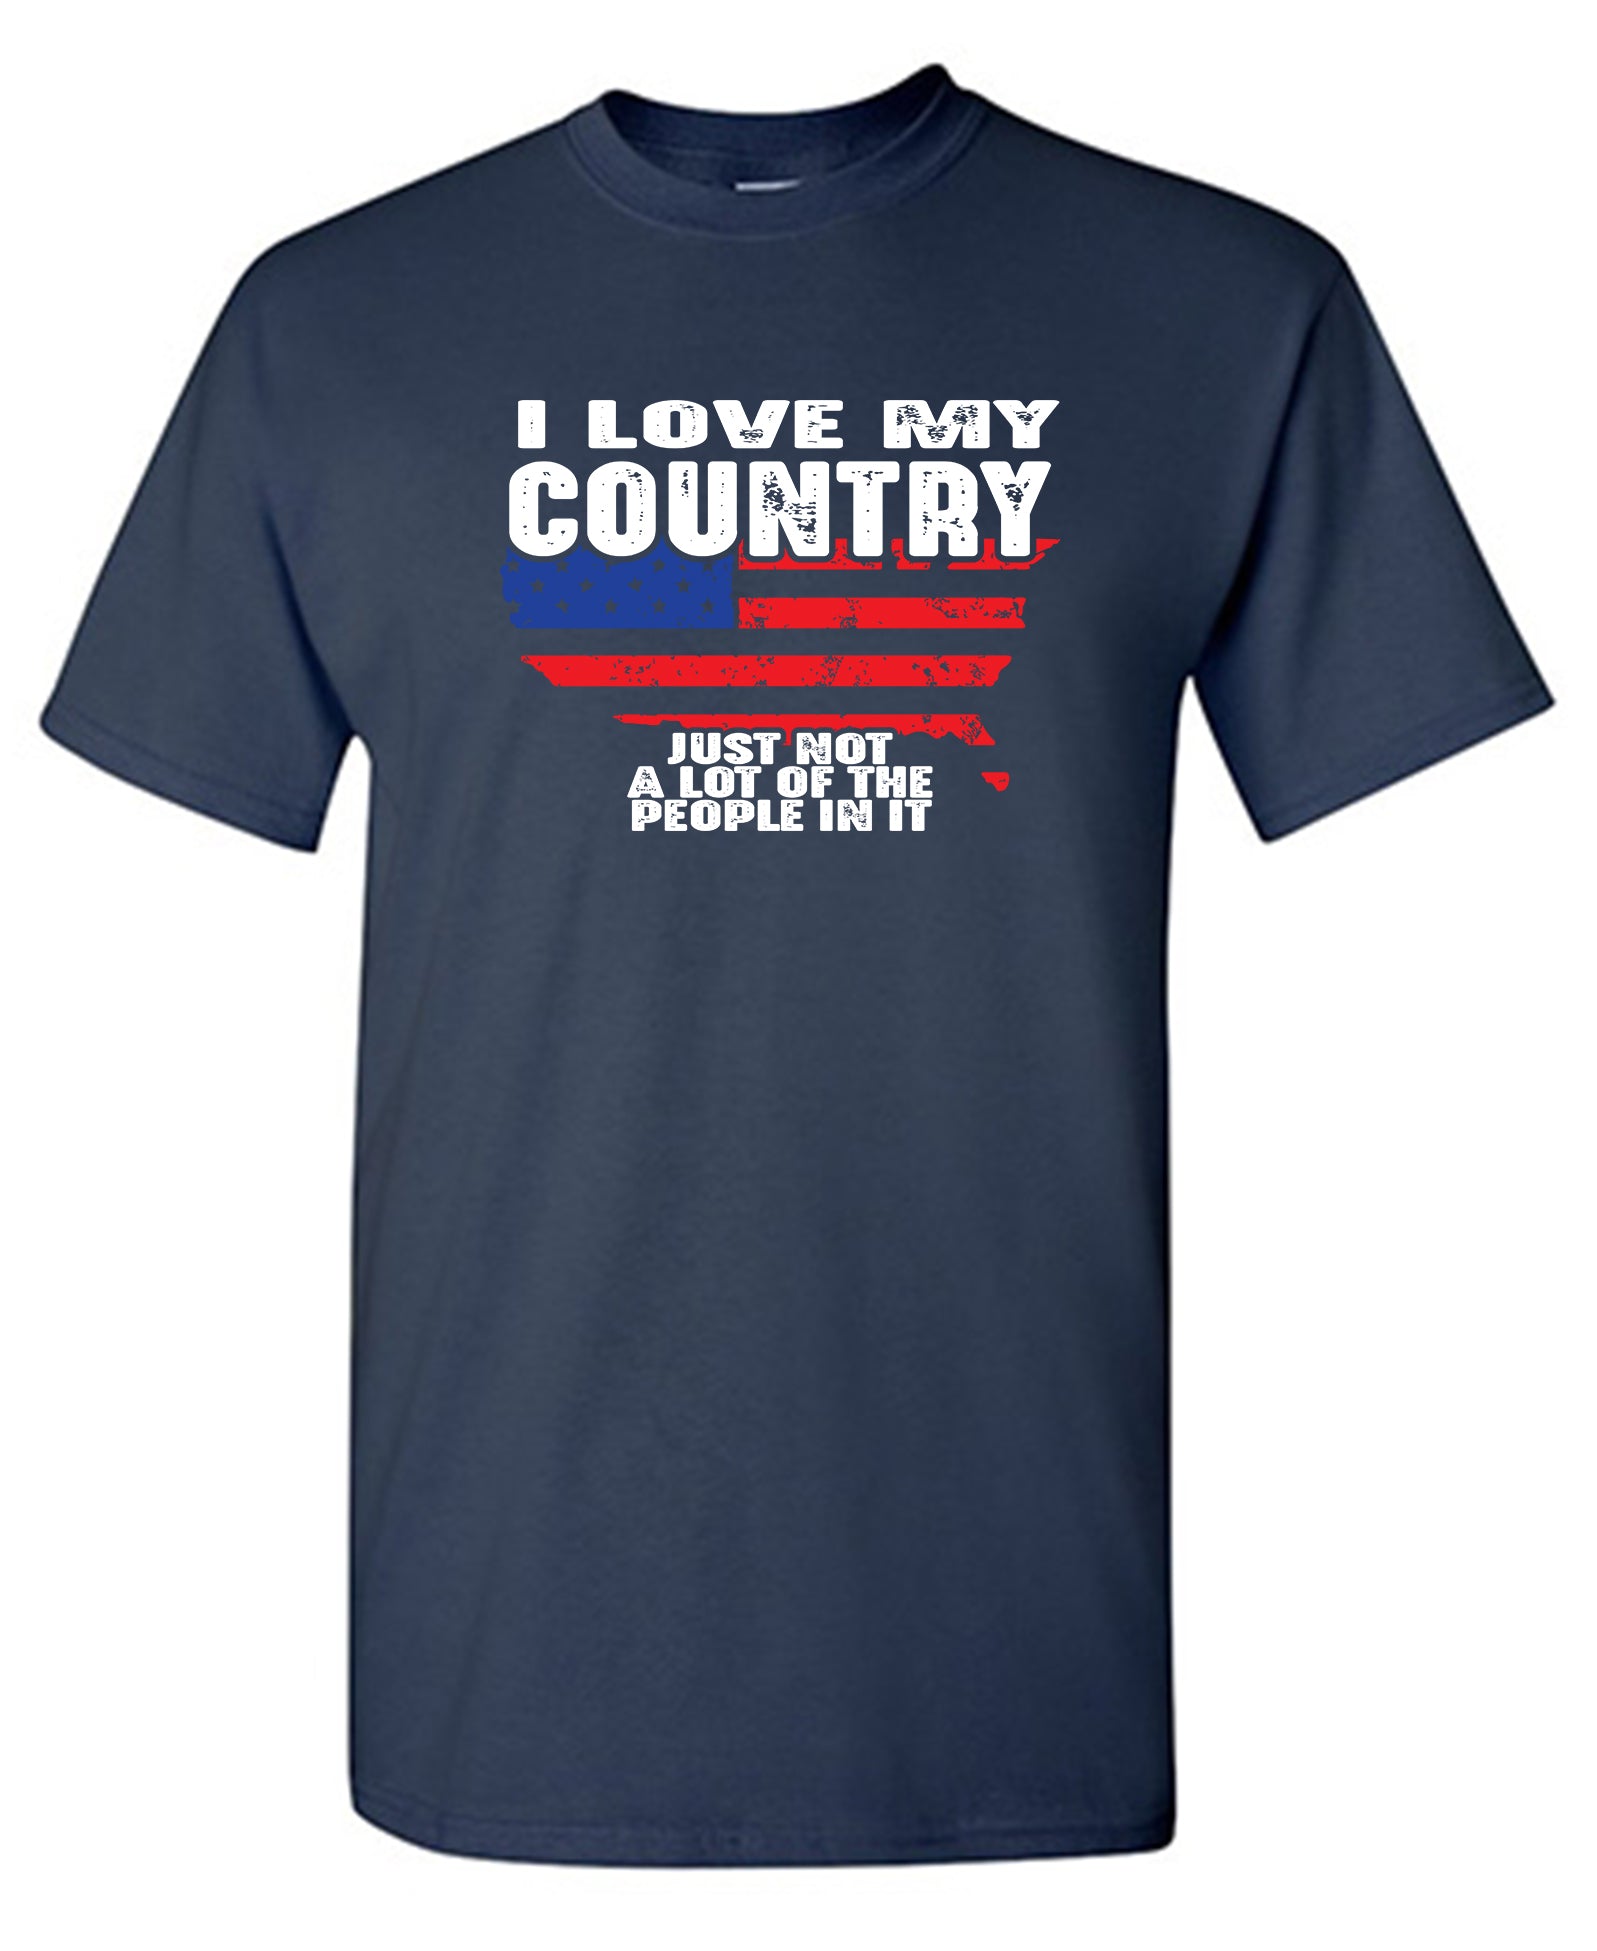 I Love My Country, Just not… - Funny T Shirts & Graphic Tees